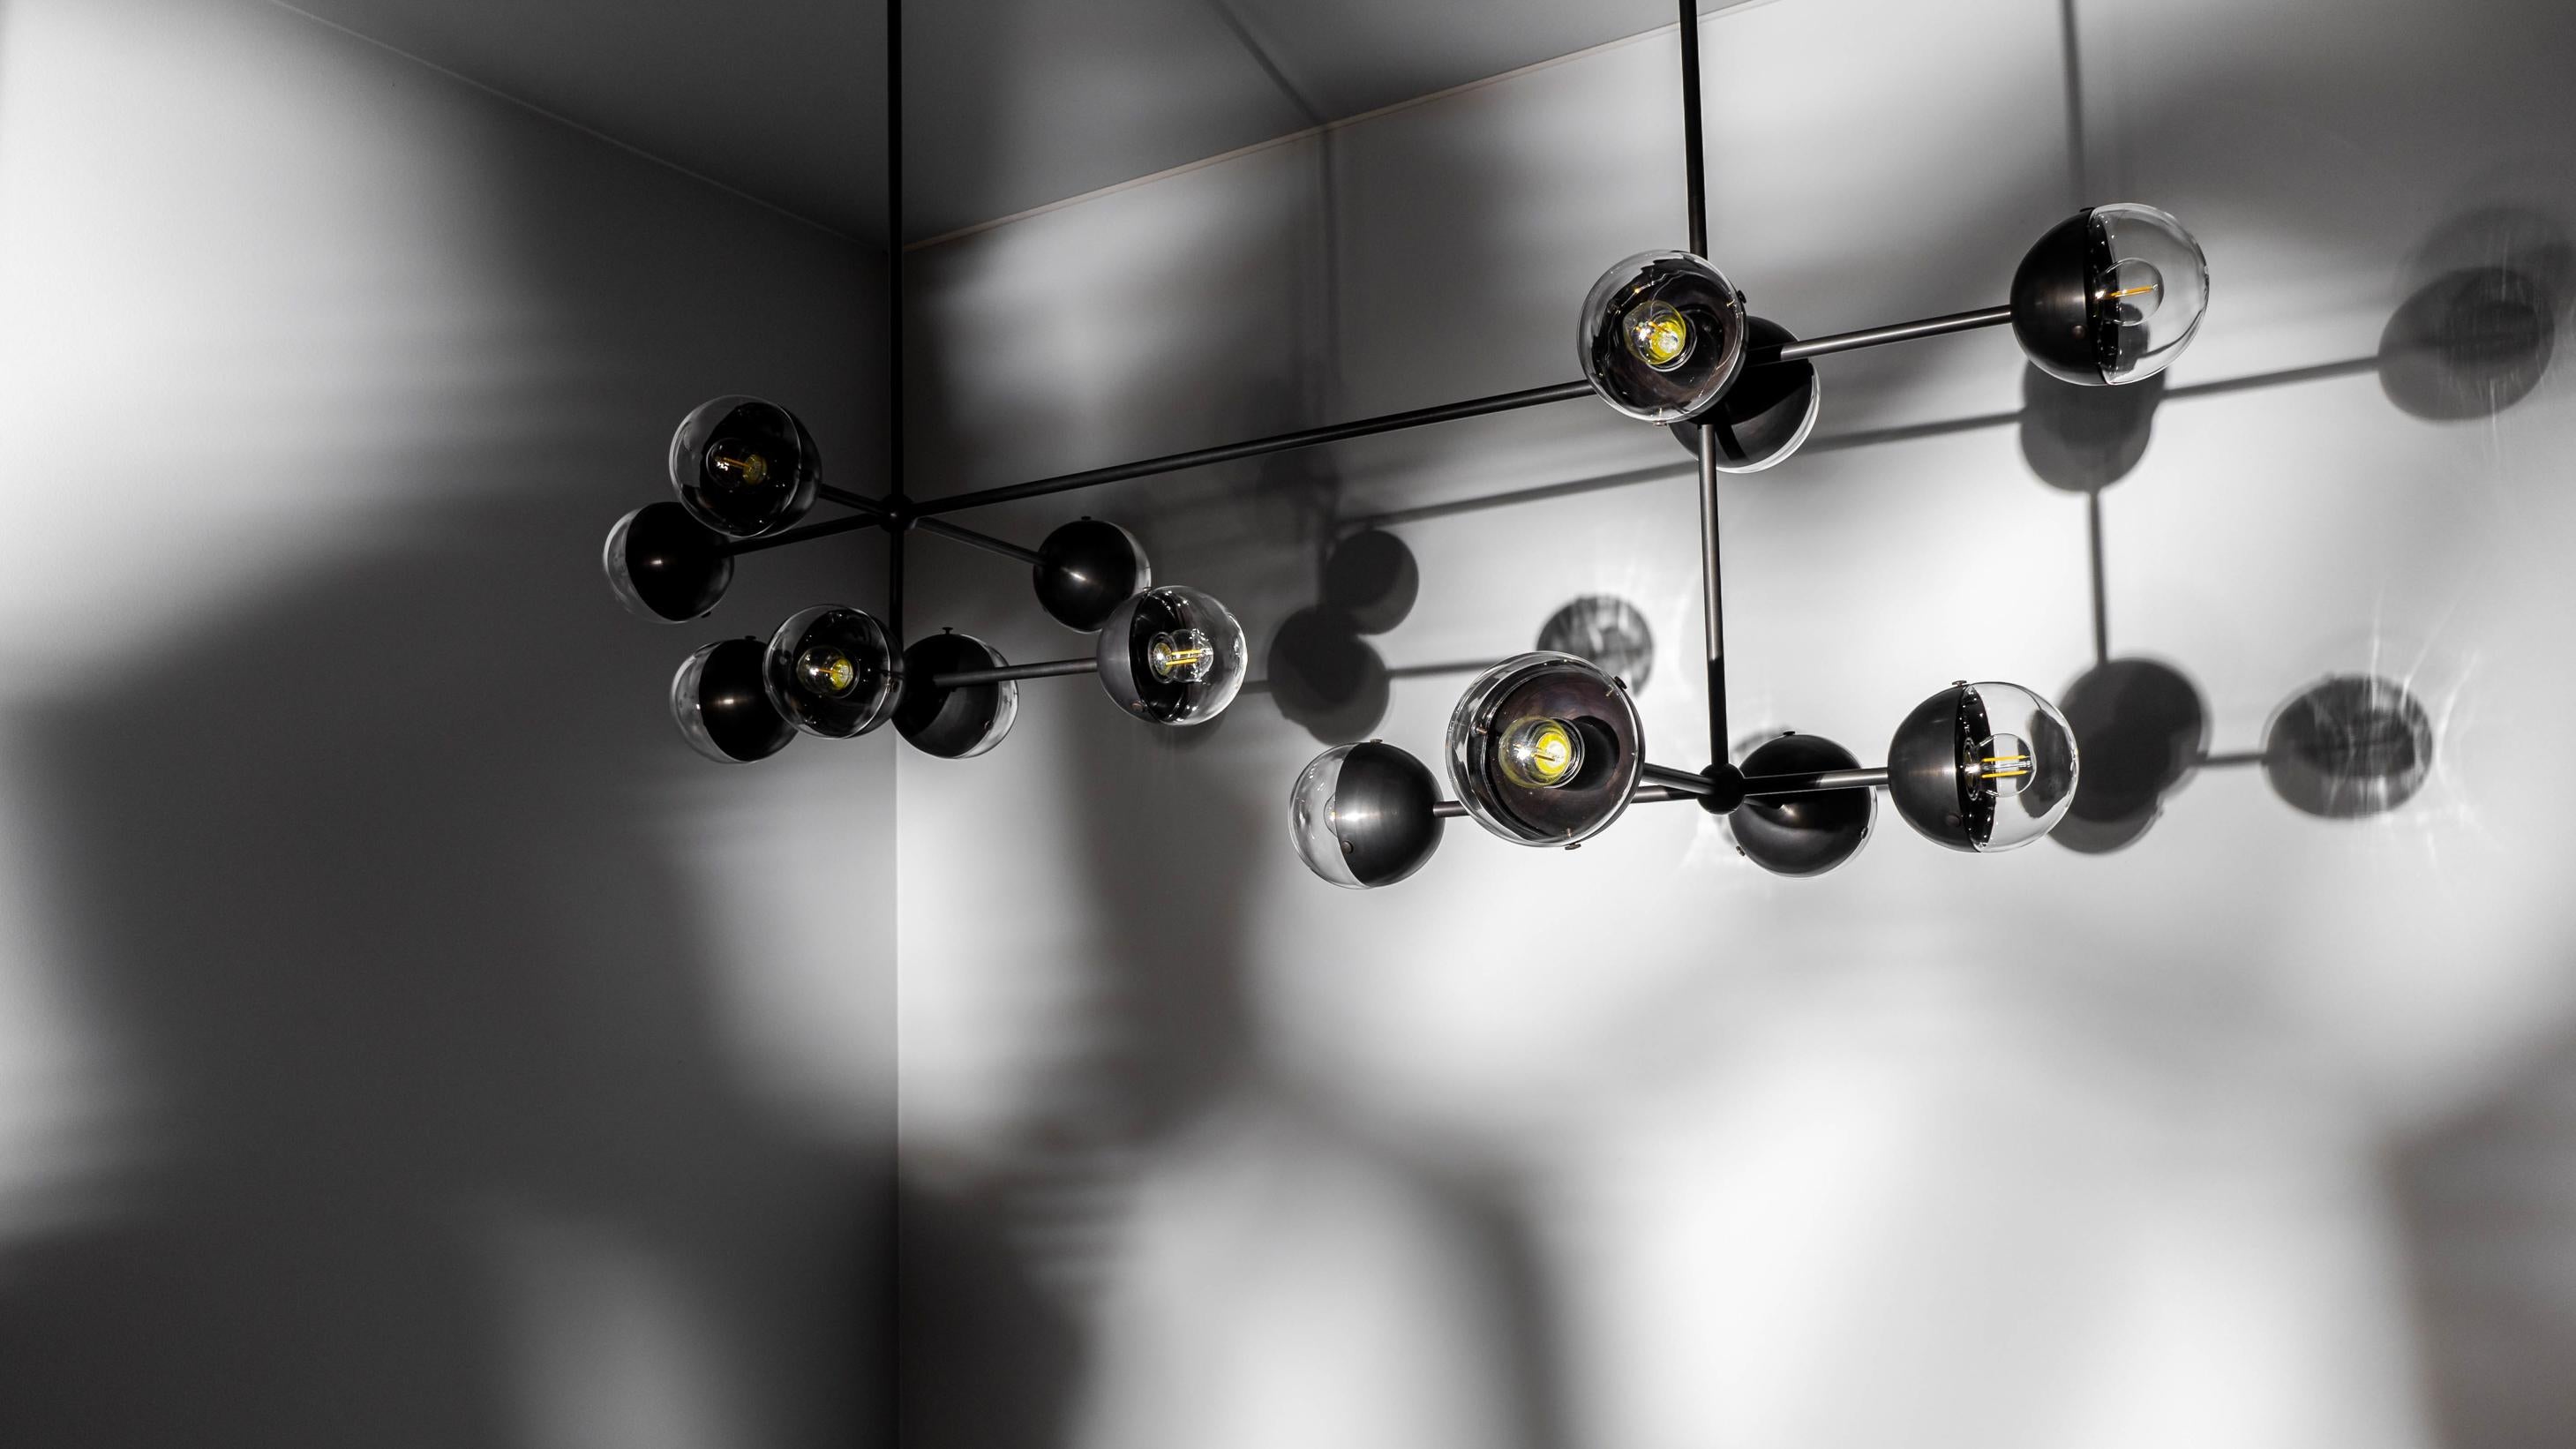 A fashionable line of enclosed bulbs expands into a playful configuration of elemental proportions. This chandelier of electric light represents the unseen forces shaping our material world.

Available in our three signature finishes: Lacquered